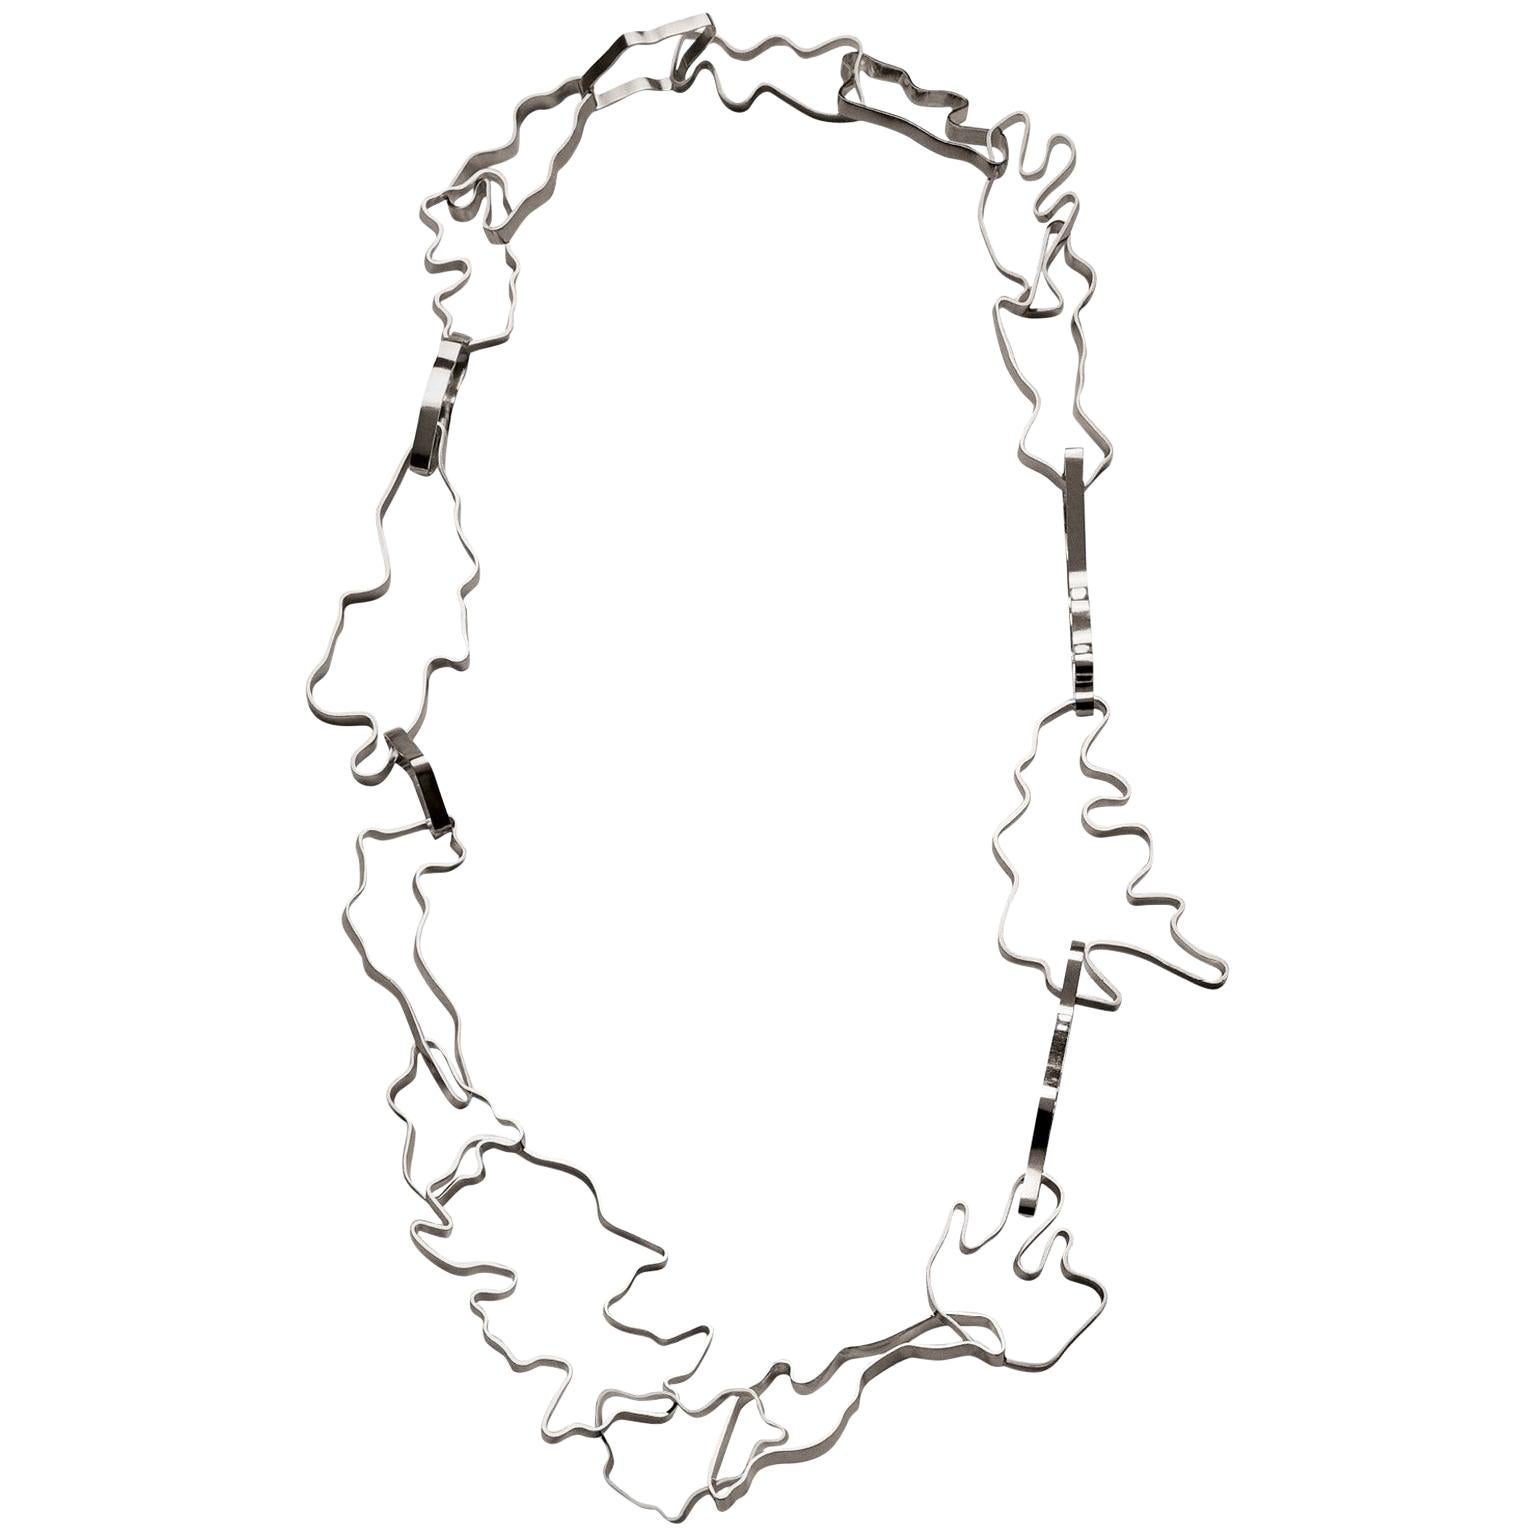 Nathalie Jean Contemporary Sterling Silver Limited Edition Link Chain Necklace (collier à maillons en argent)